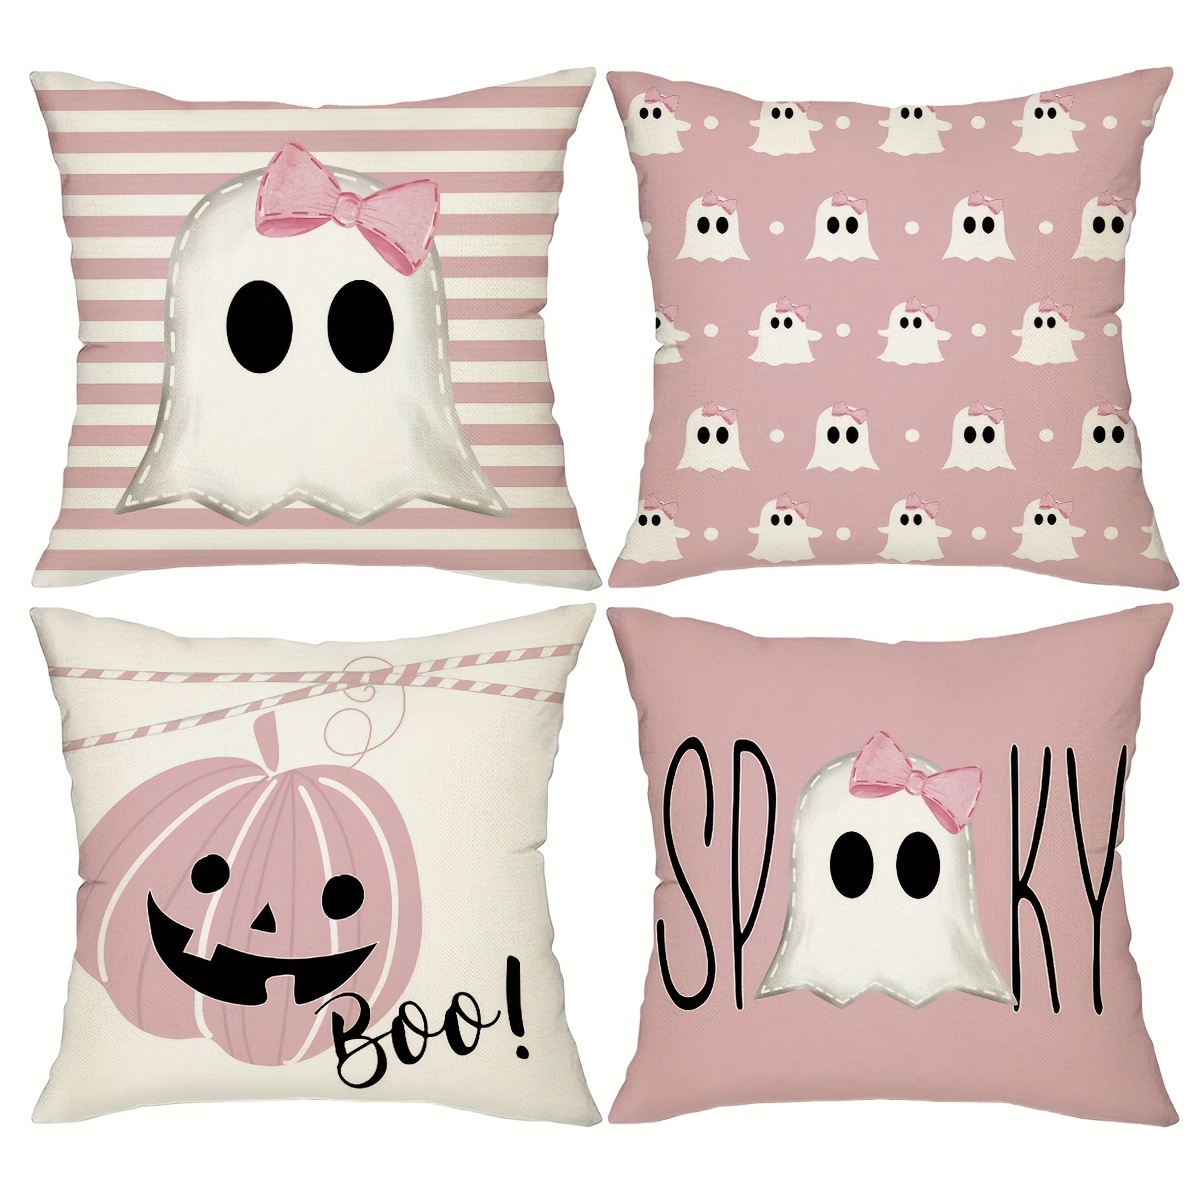 

4pcs Halloween Pillow Covers, 18*18inch Set Of 4 Striped Polka Dots Spooky Ghost Jack O'lantern Pumpkin Boo Decor Holiday Cushion Cases Party Decoration For Home Sofa, Without Pillow Inserts